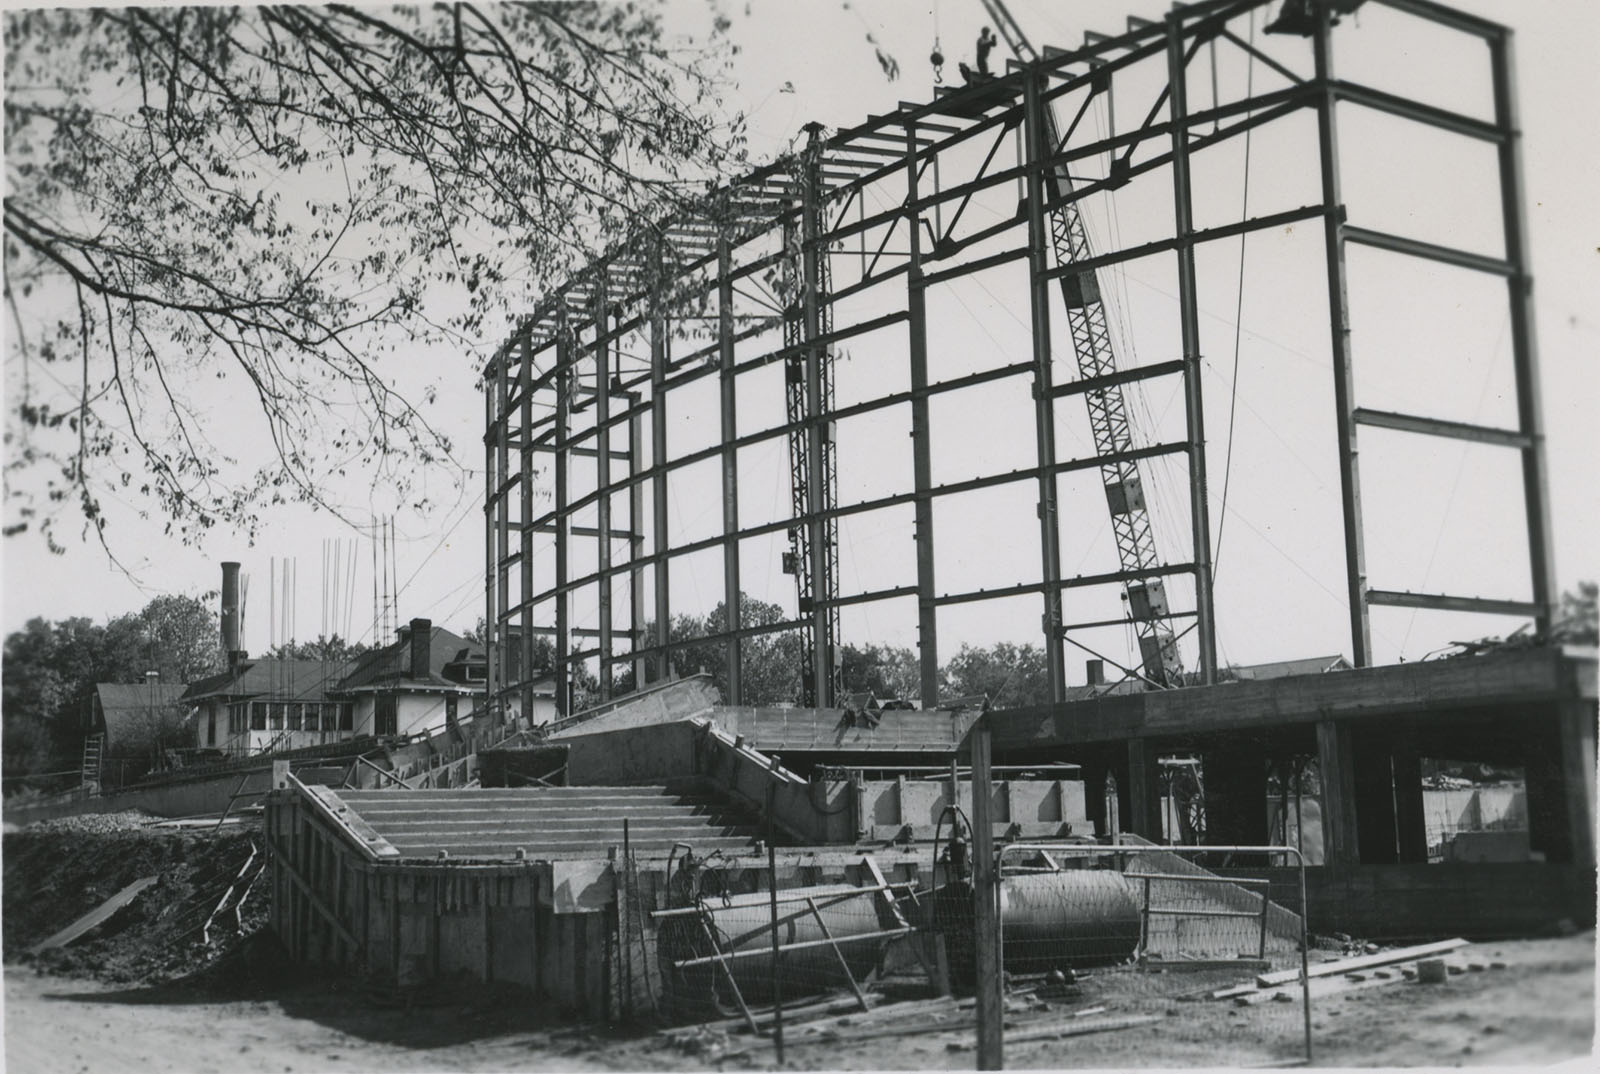 In October 1951, the first high riveting was done as Vanderbilt's Memorial Gym, designed by alumnus Edwin Keeble, began to take shape.